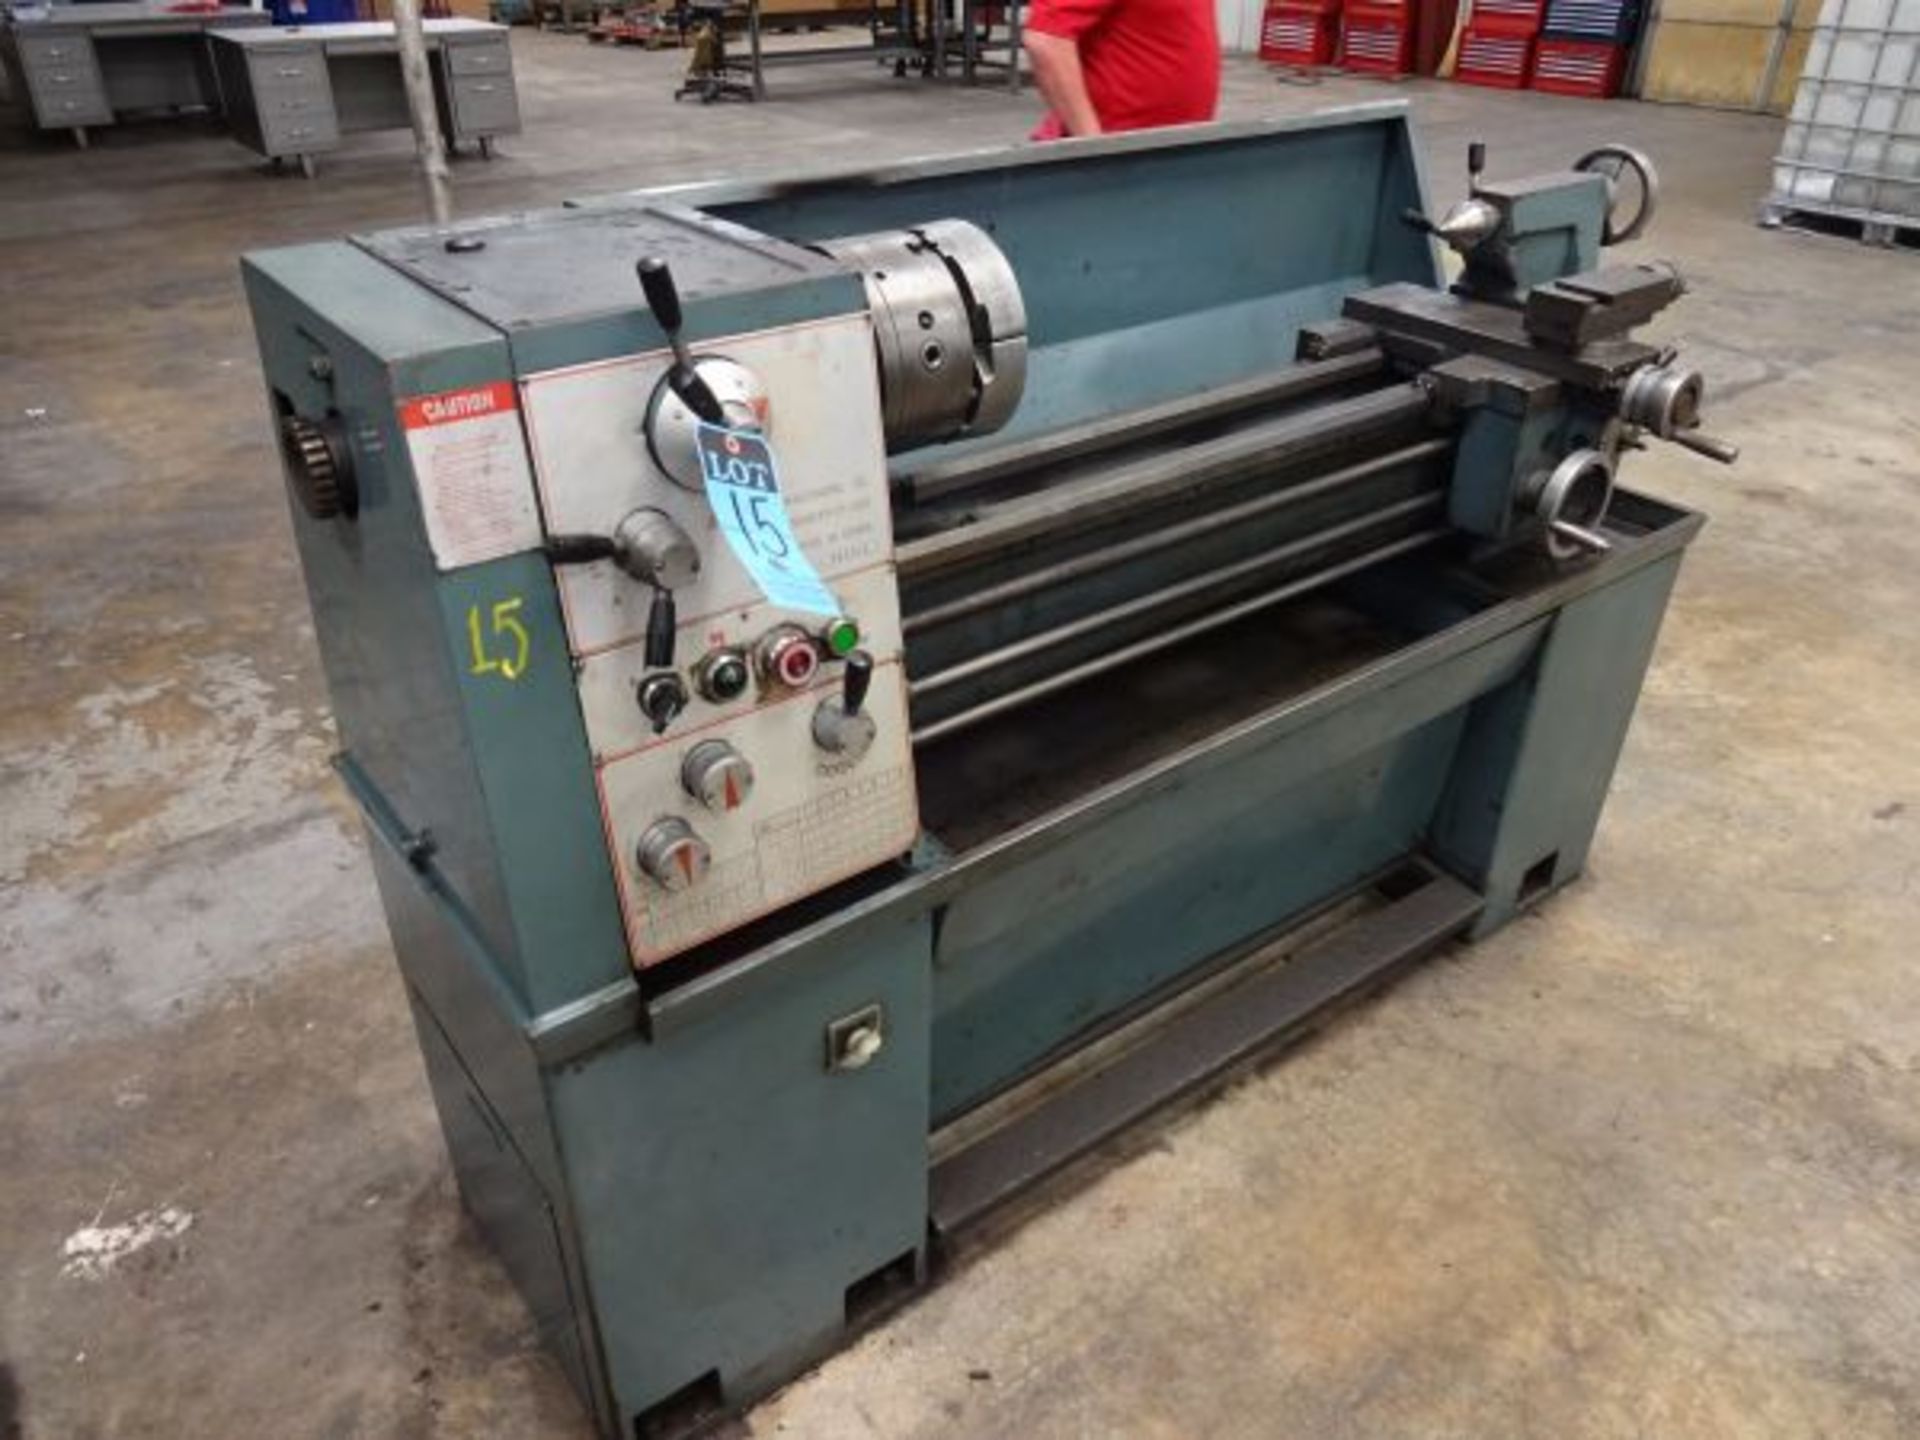 13" X 34" Enco Model 111-3320 Engine Lathe; S/N 940038, 8" 3-Jaw Chuck, 1" Spindle Bore, 45-1,800 - Image 2 of 10